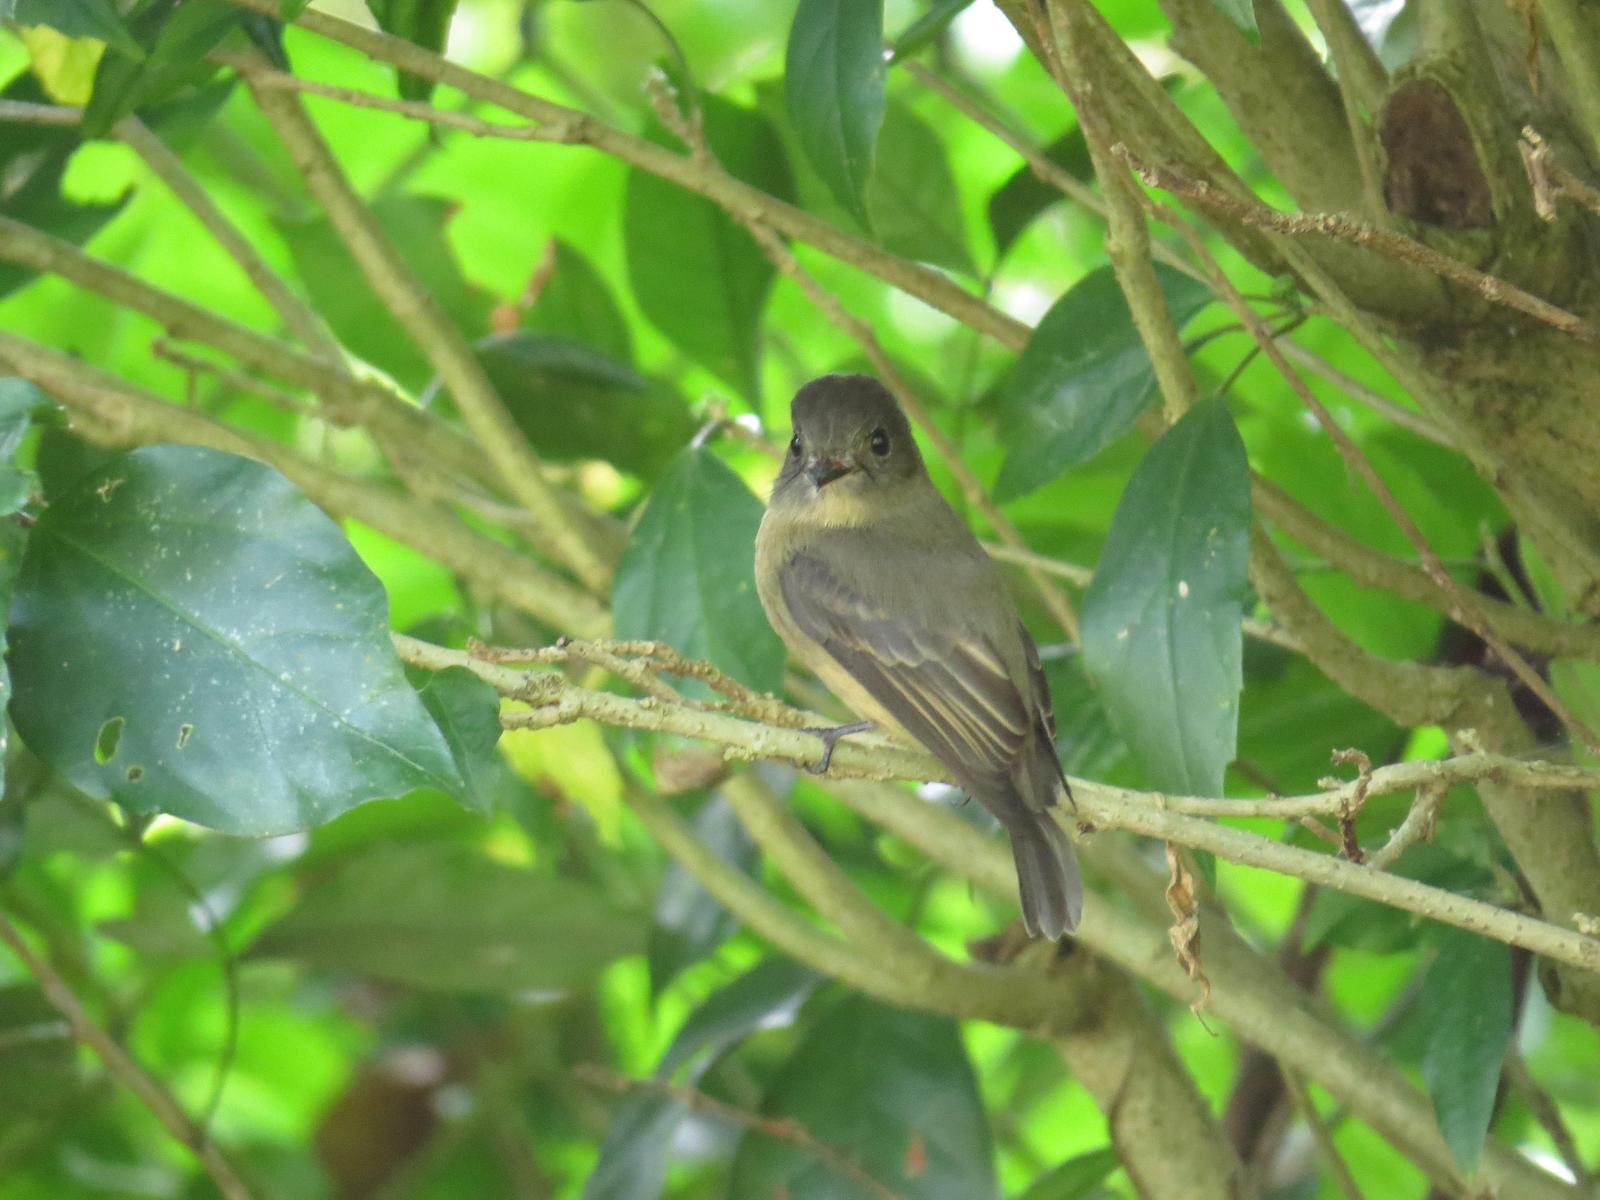 Lesser Antillean Pewee Photo by Bonnie Clarfield-Bylin